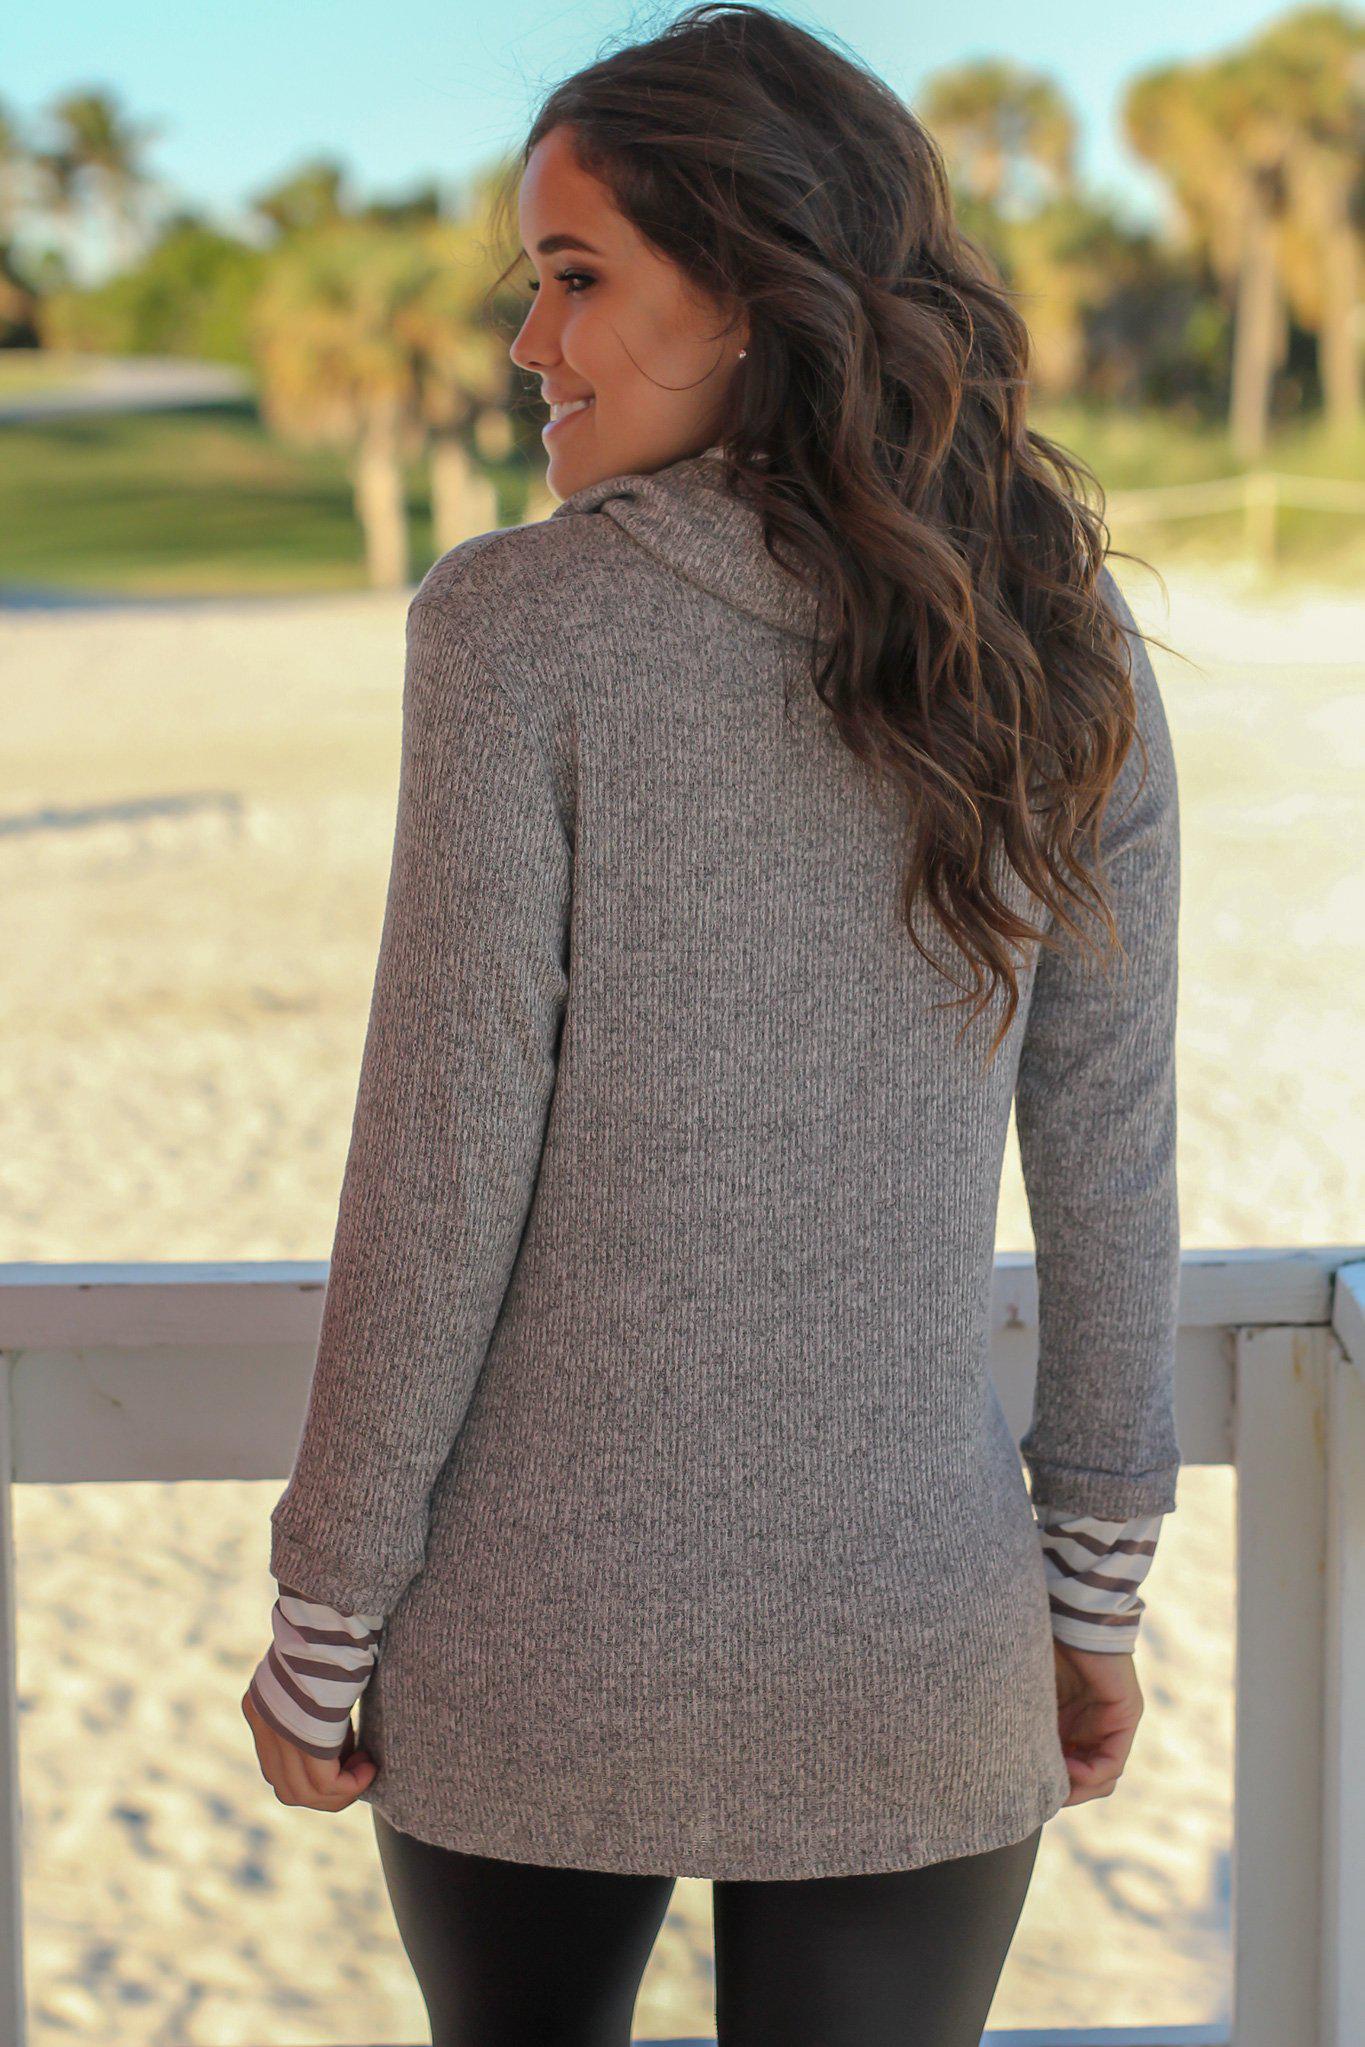 Mocha Cowl Neck Top with Stripes